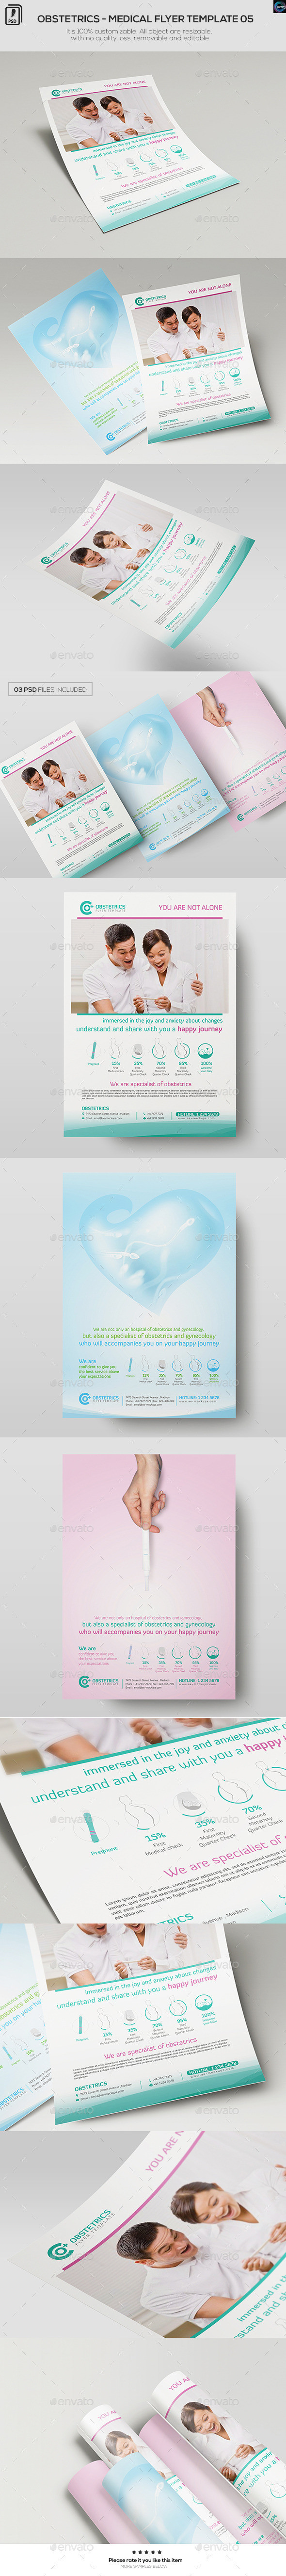 Obstetrics medical flyer template 05 preview